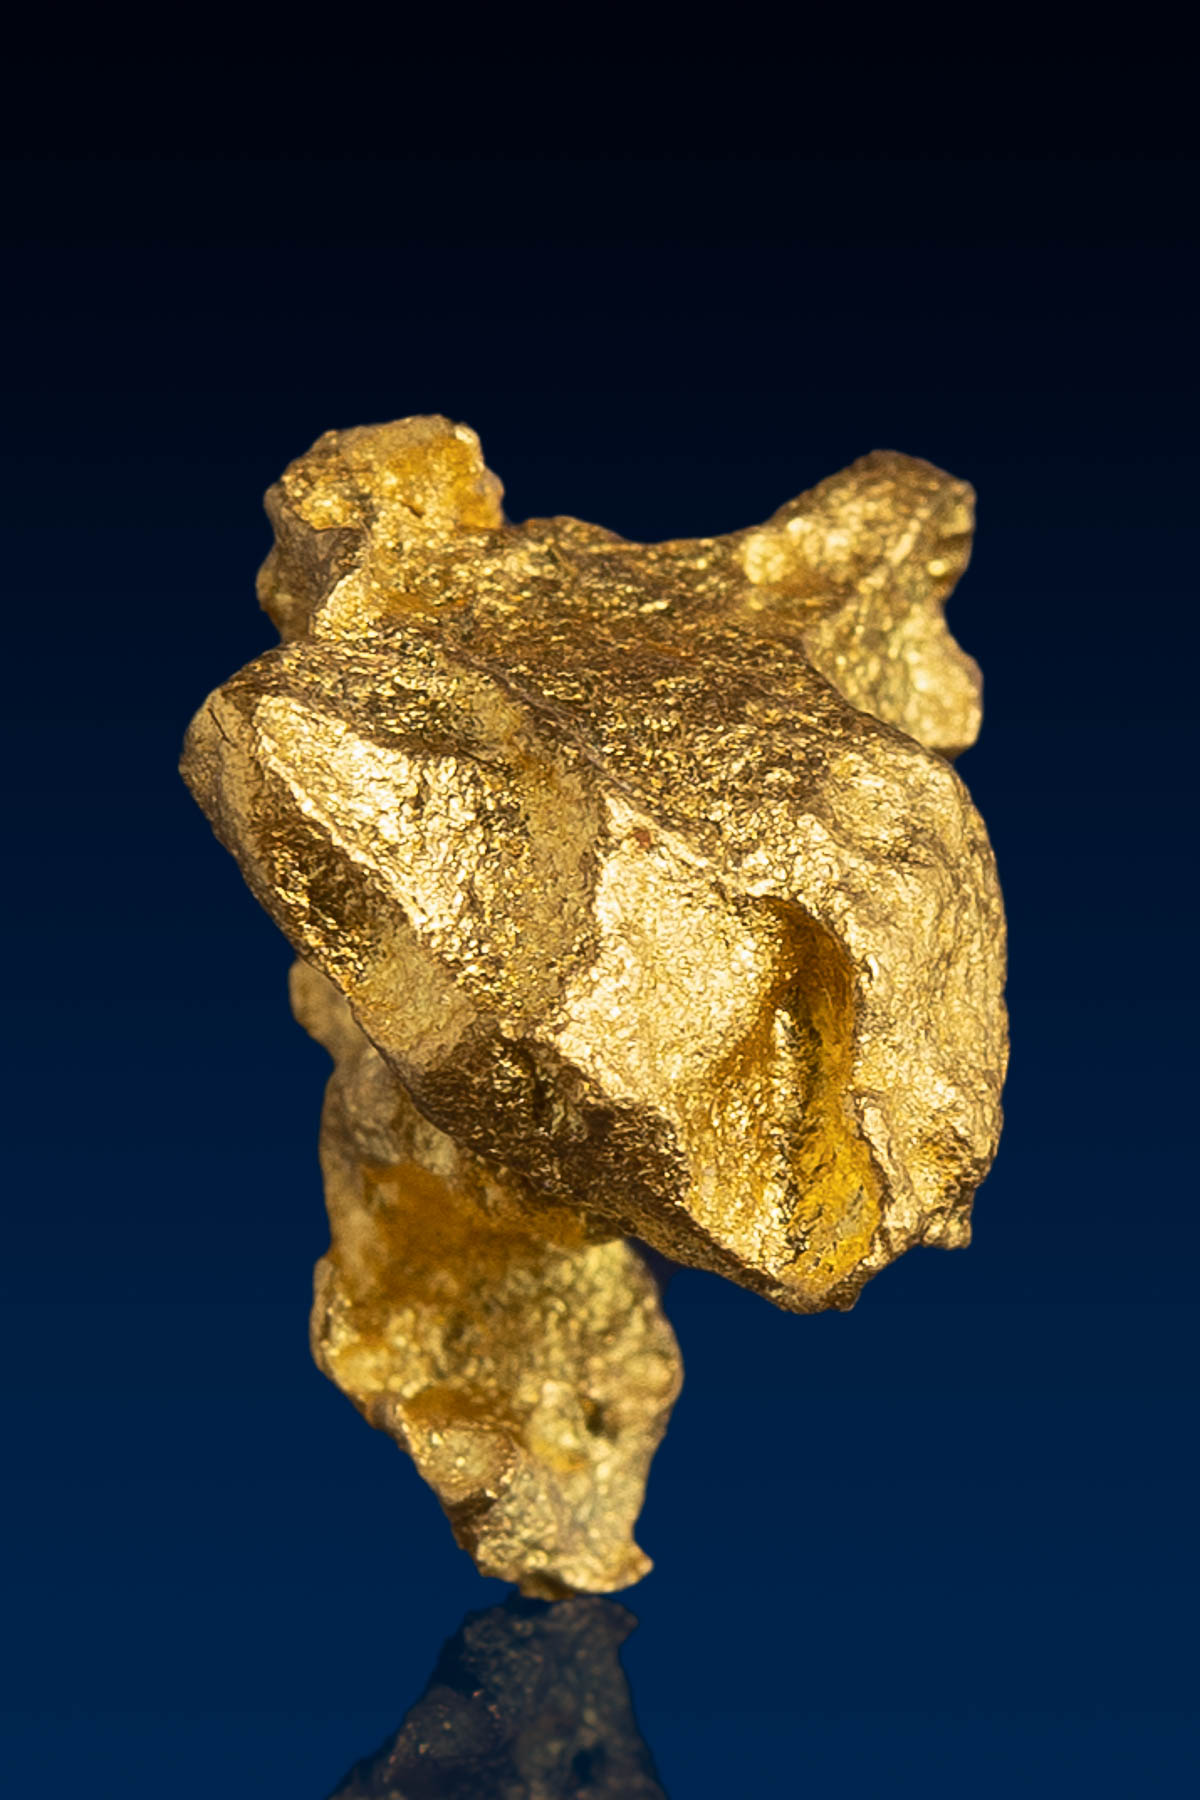 Pointed Australian Natural Gold Nugget - 2.01 grams